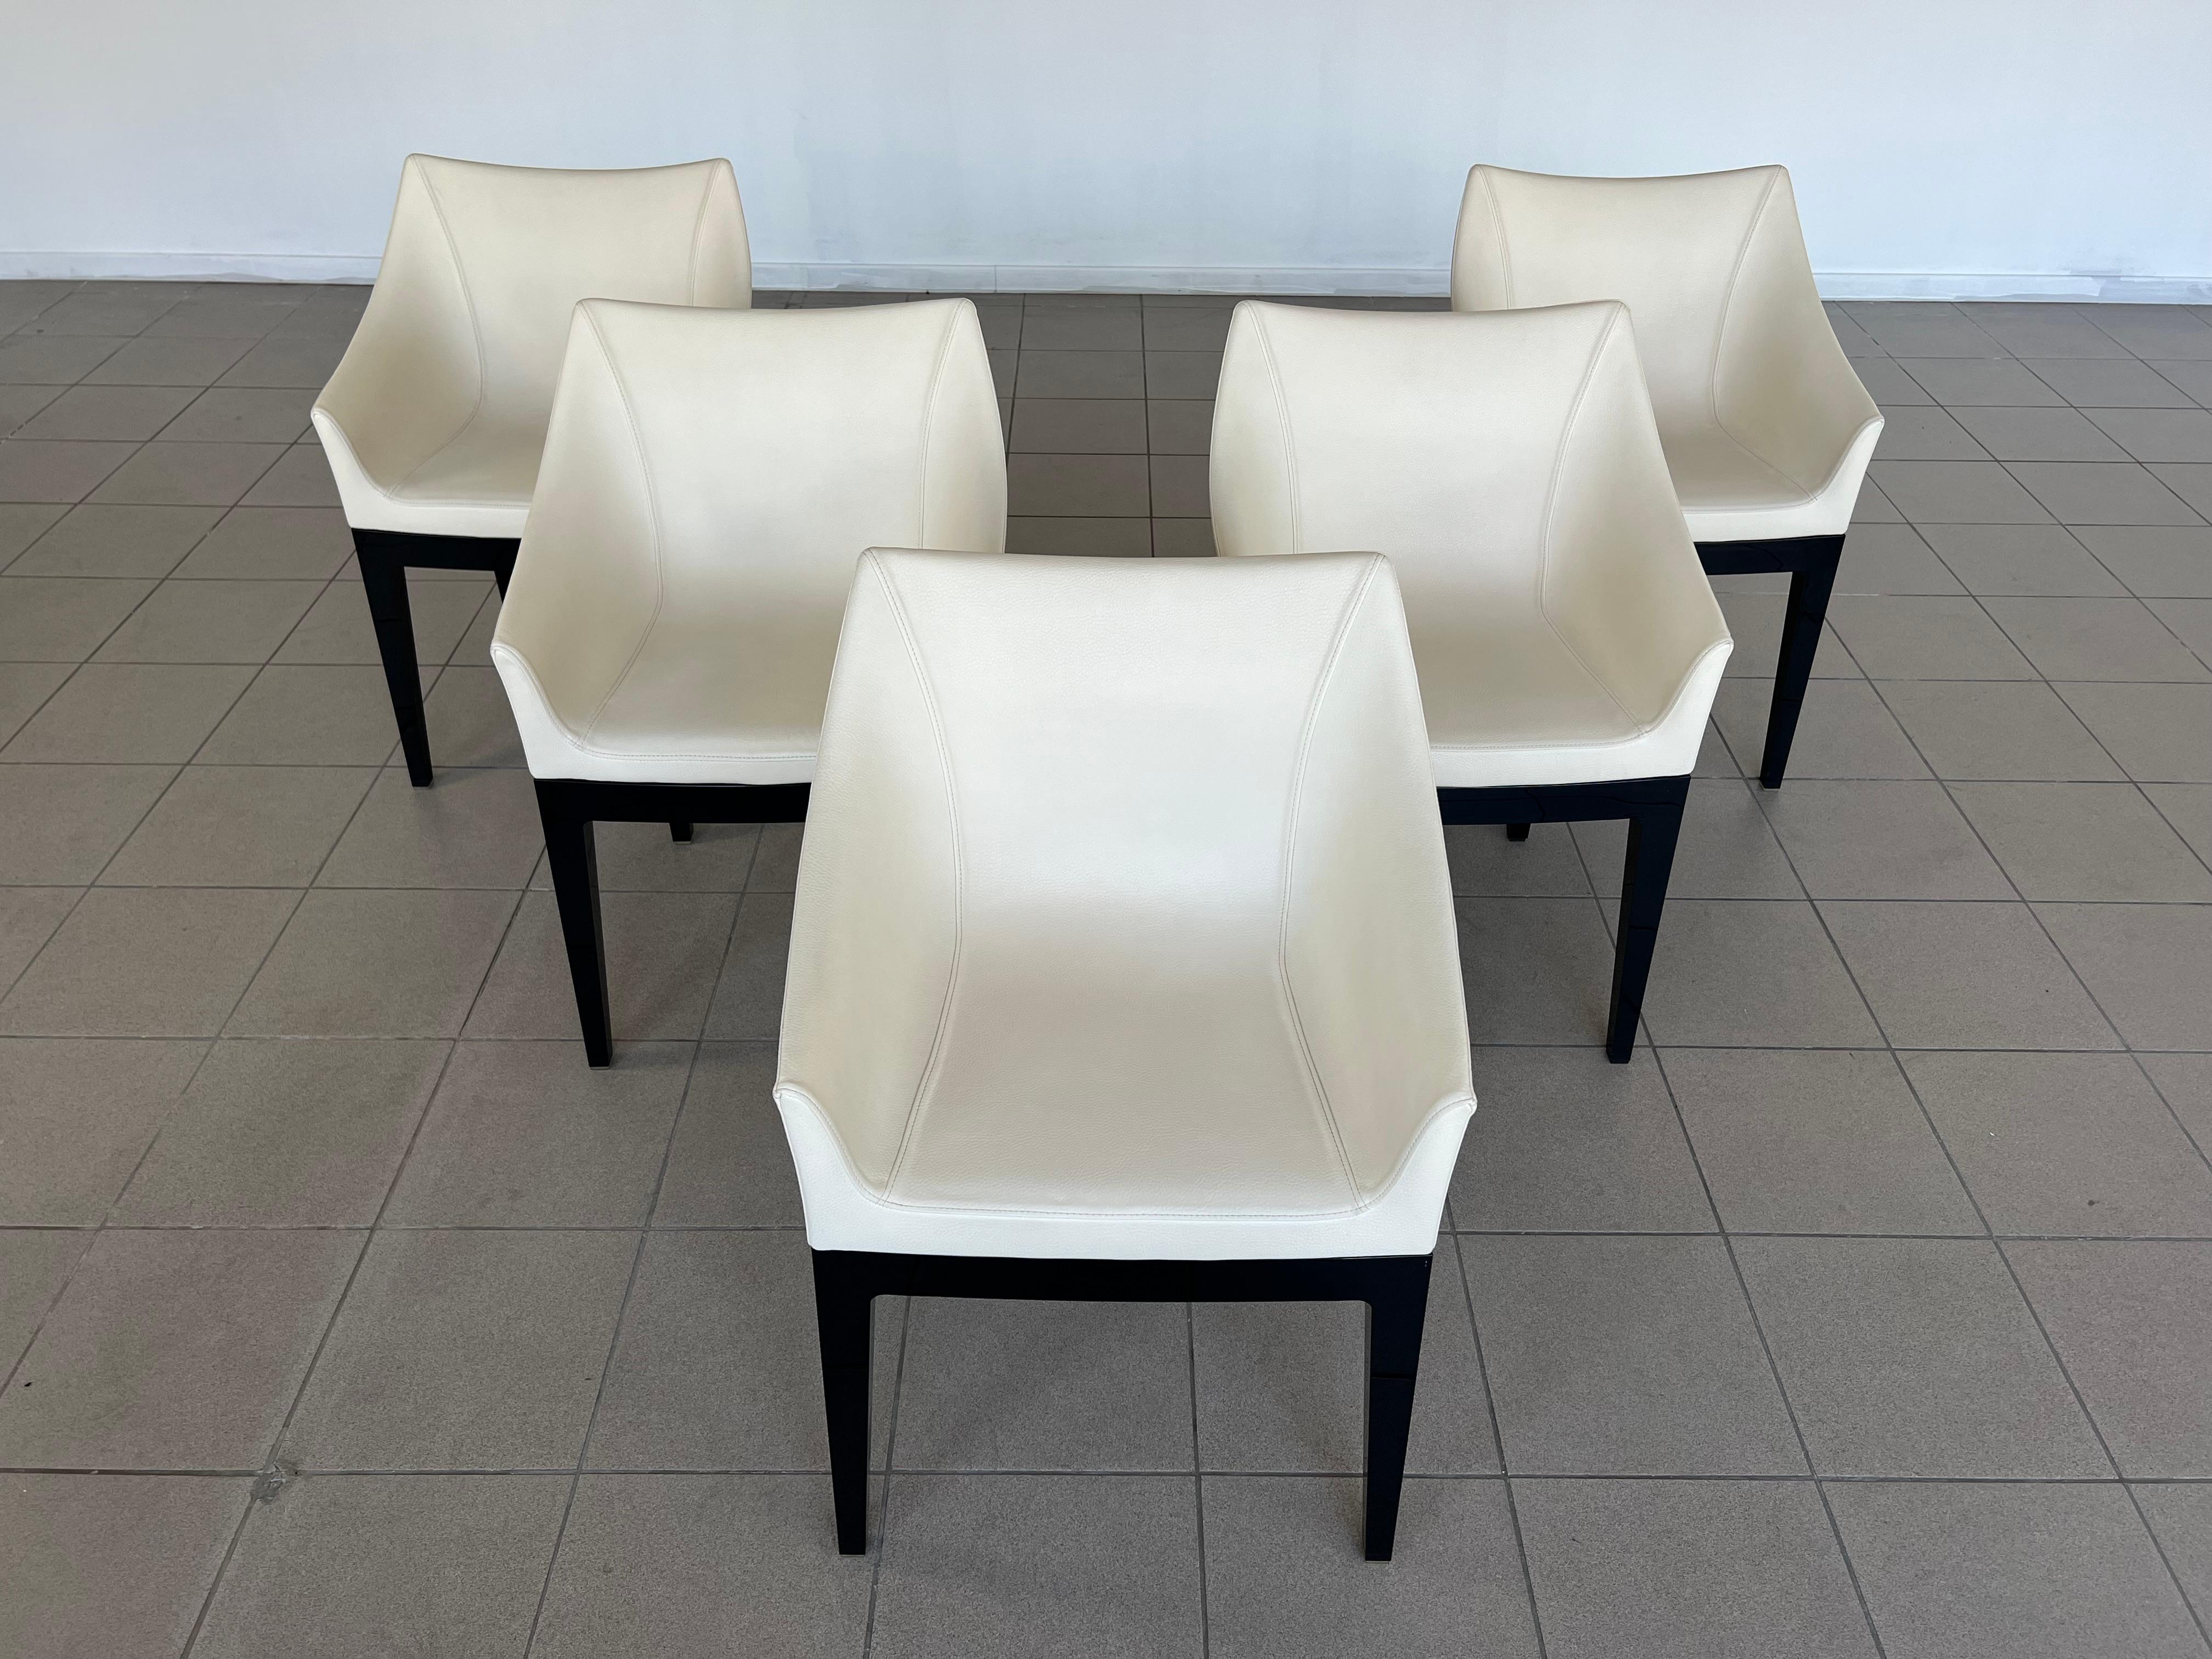 20th Century Original Mademoiselle Leather Chairs by Philippe Starck for Kartell - Set of 5 For Sale